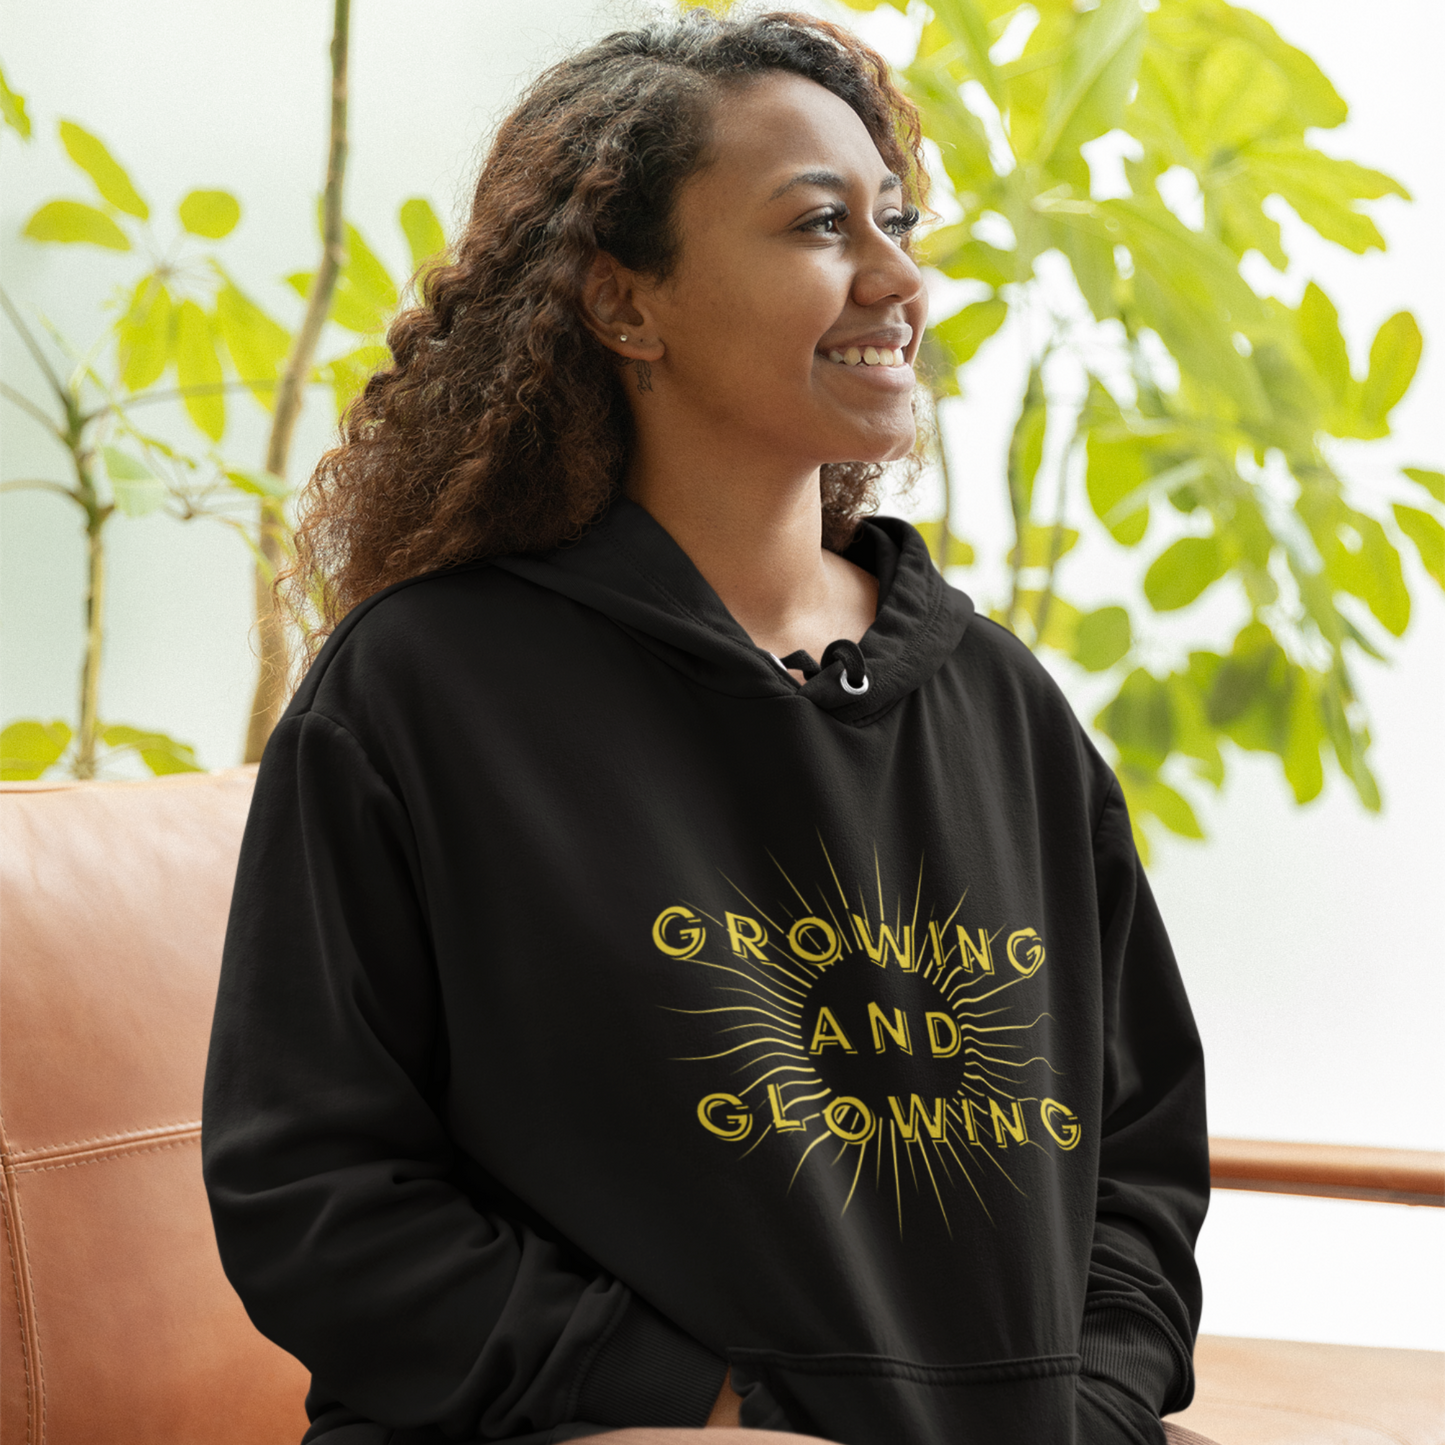 Growing and Glowing (Graphic Yellow Text with Sun Burst) Unisex Heavy Blend Hoodie - Style: Gildan 18500